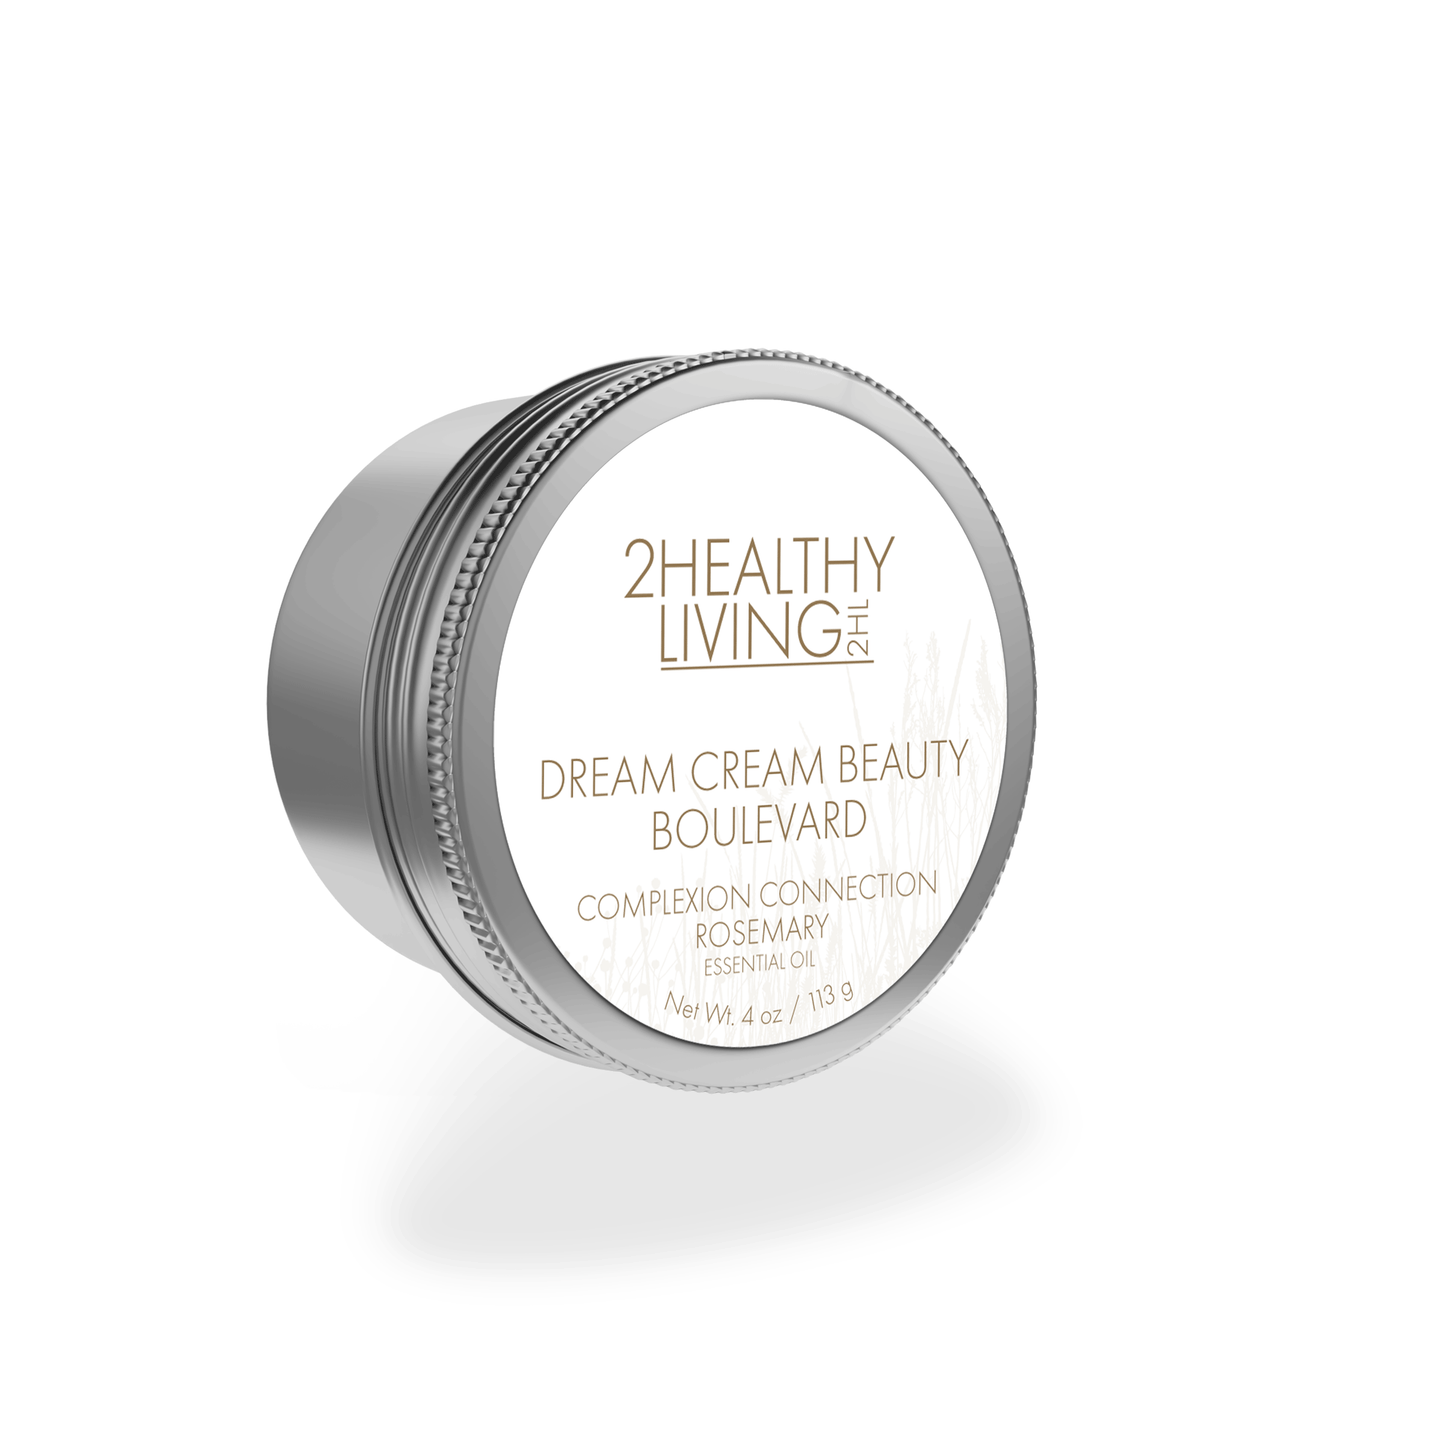 Complexion Connection Rosemary Dream Cream Beauty Boulevard